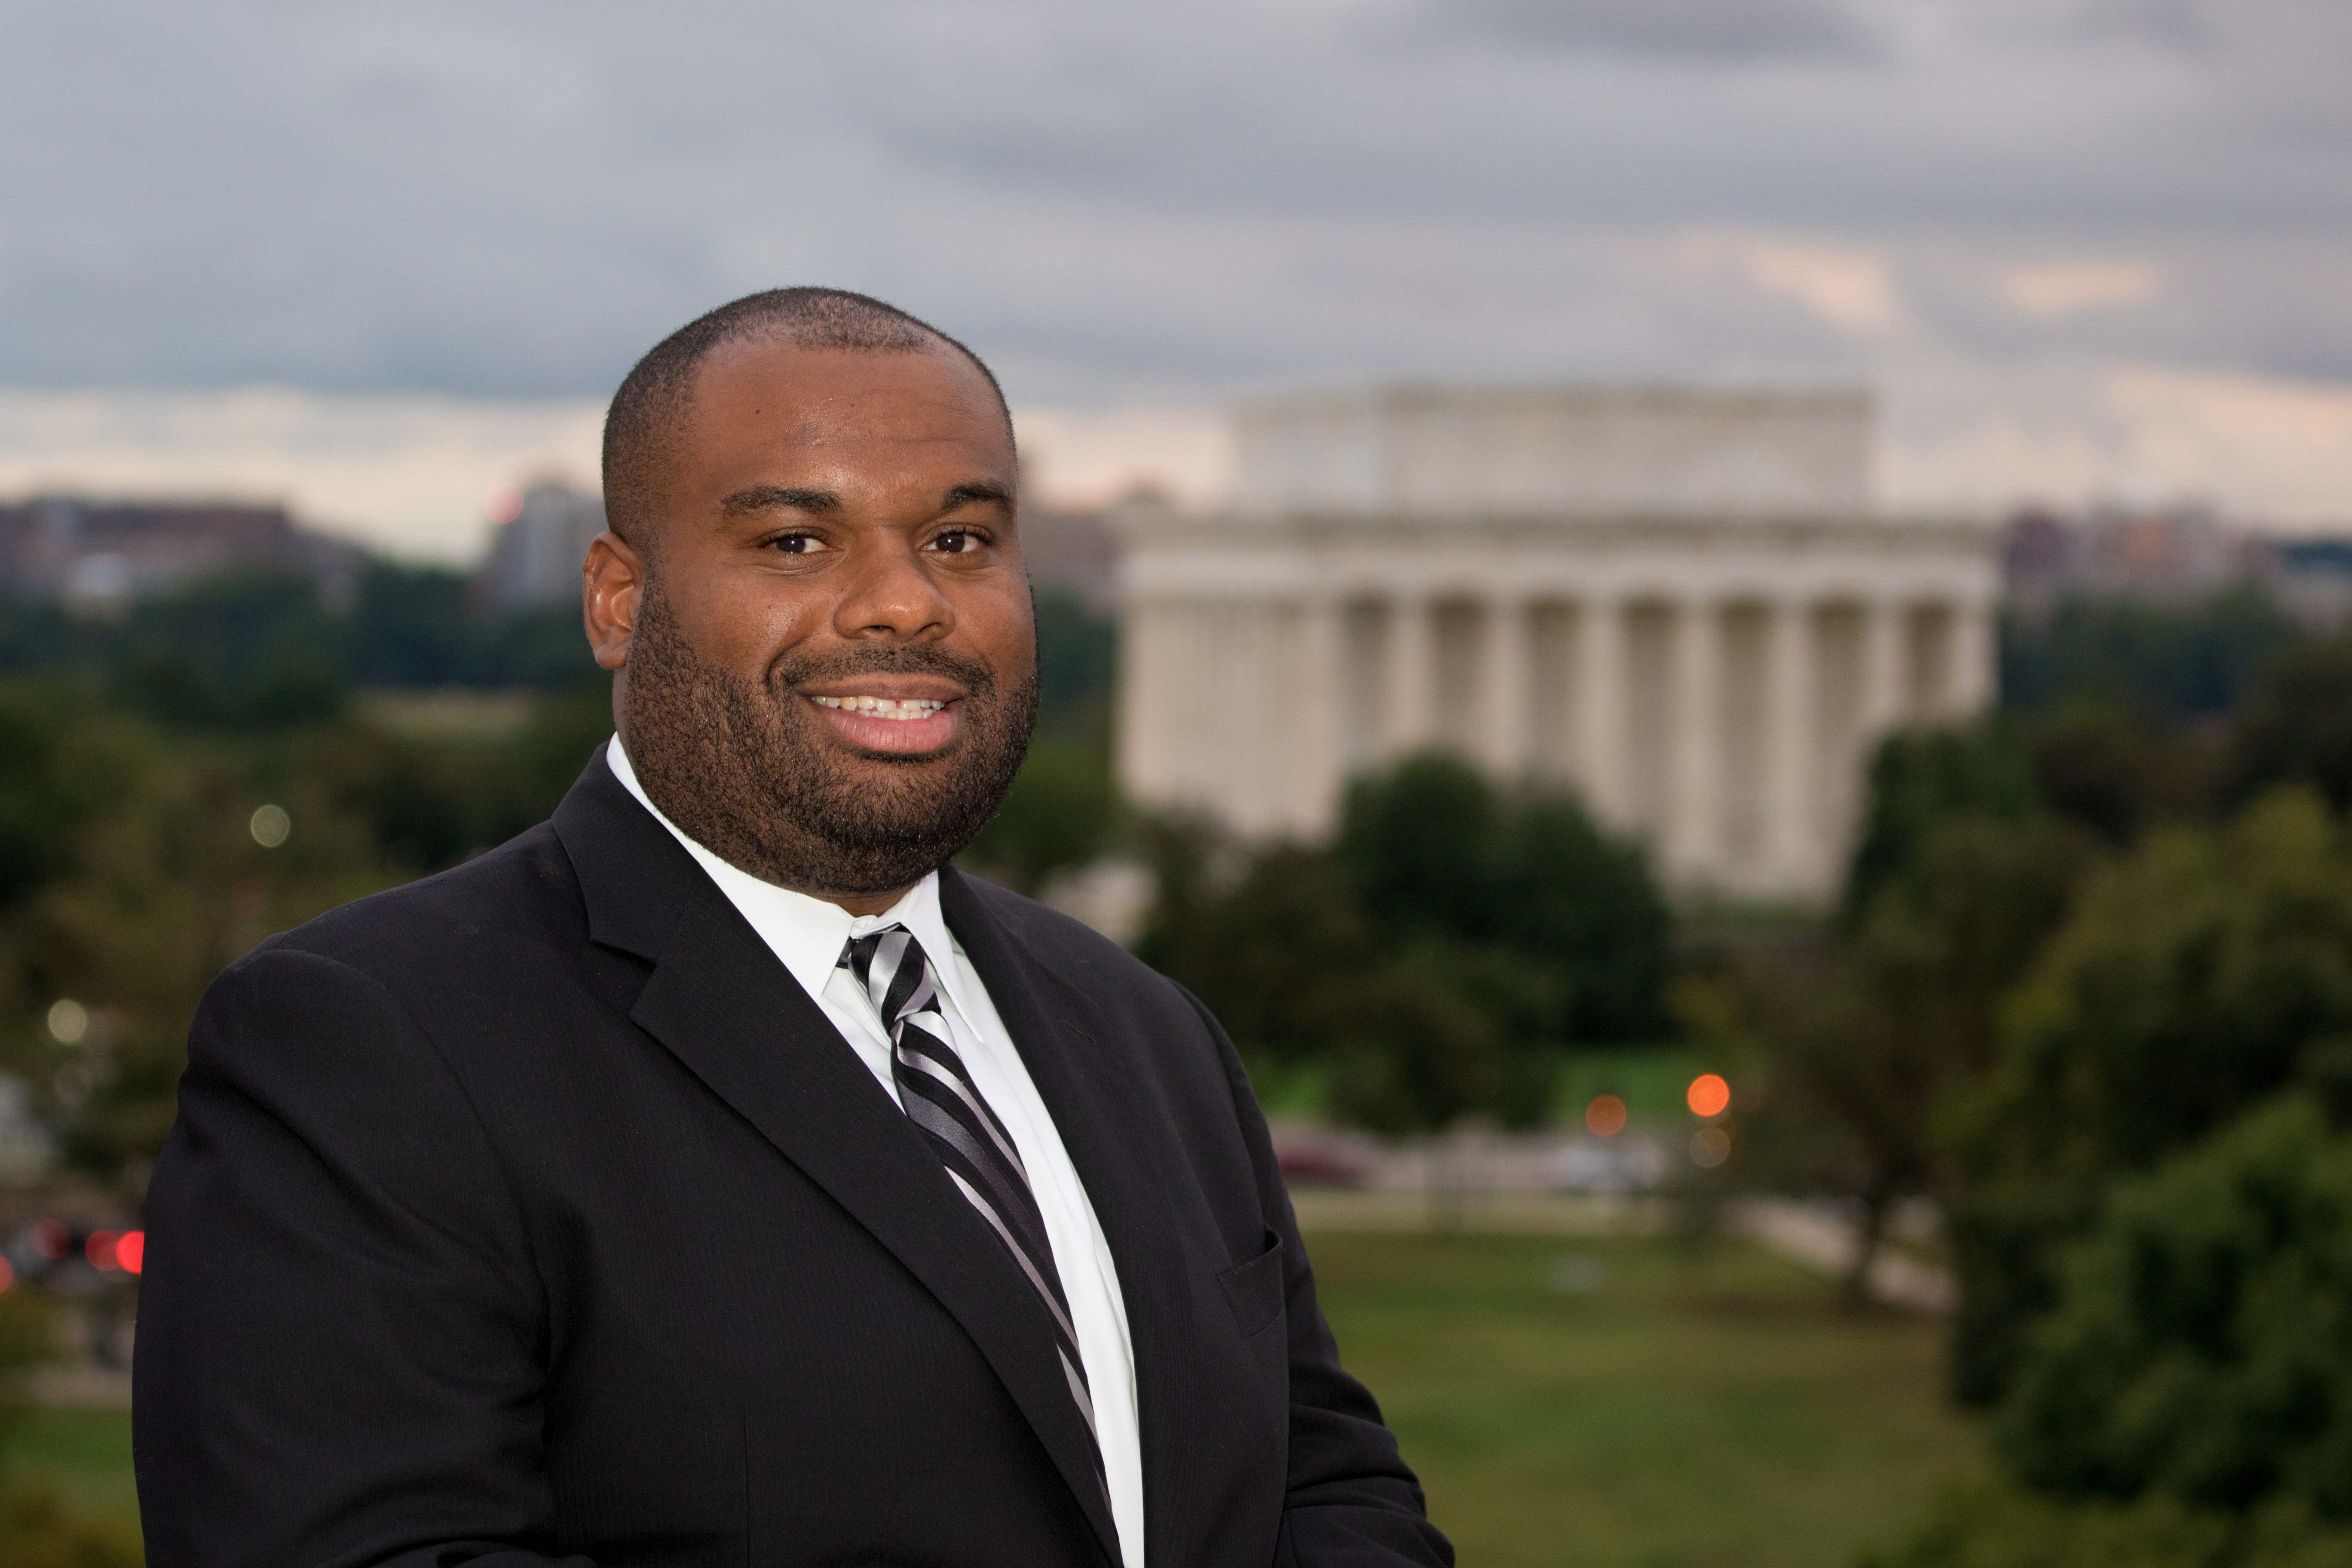 A man smiling in a dark suit, white shirt, and dark striped tie, with the Lincoln Memorial in the distance